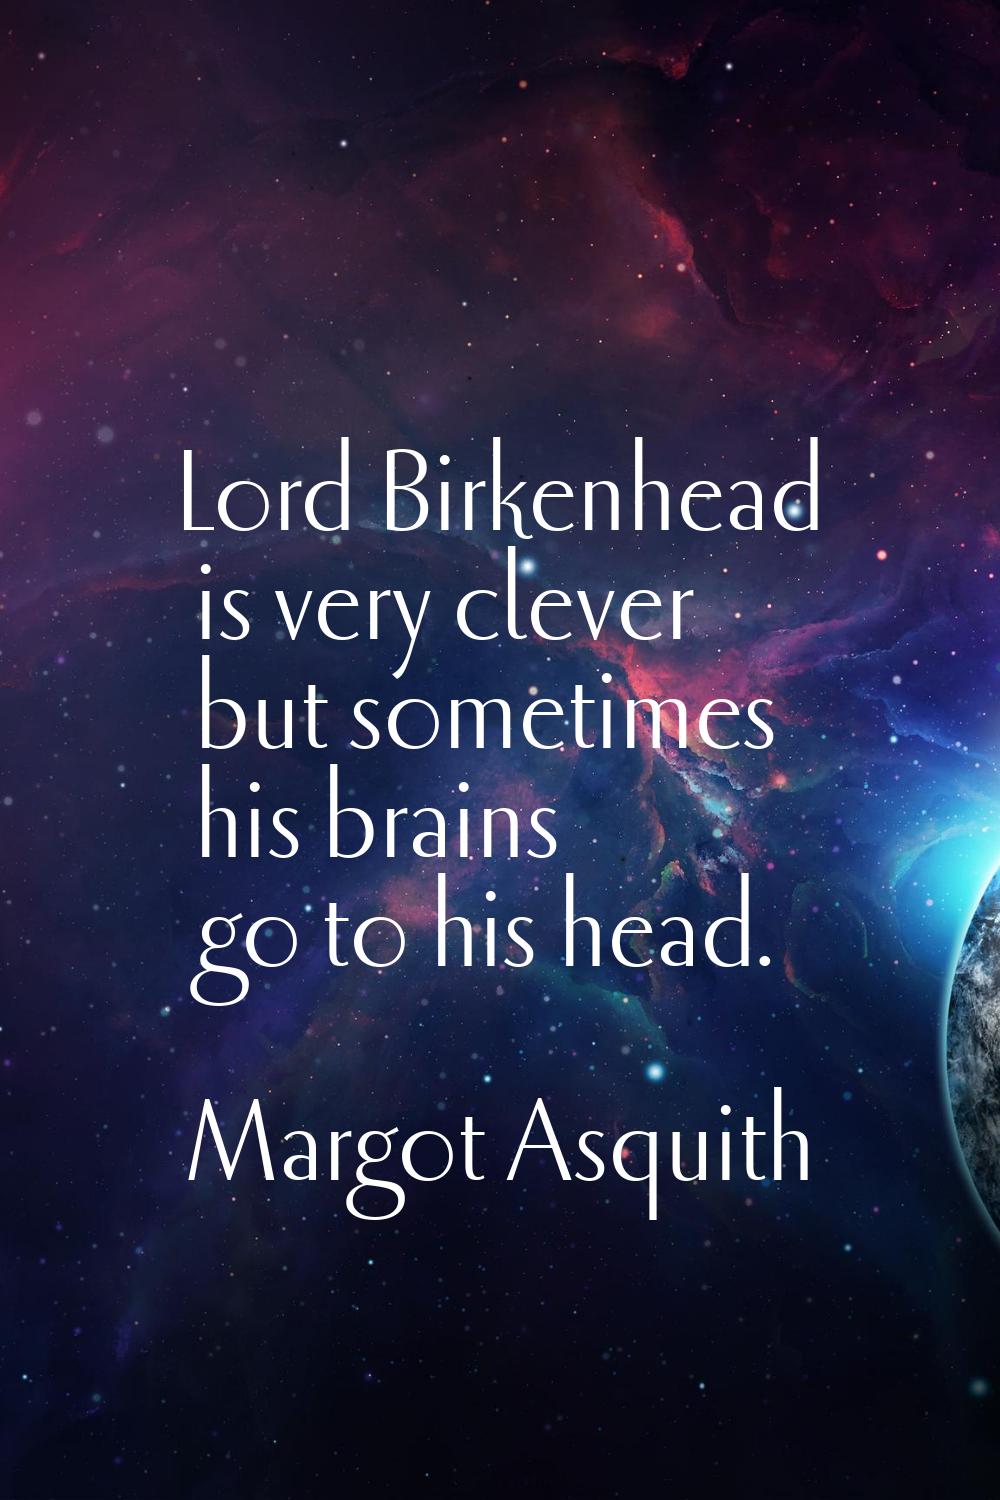 Lord Birkenhead is very clever but sometimes his brains go to his head.